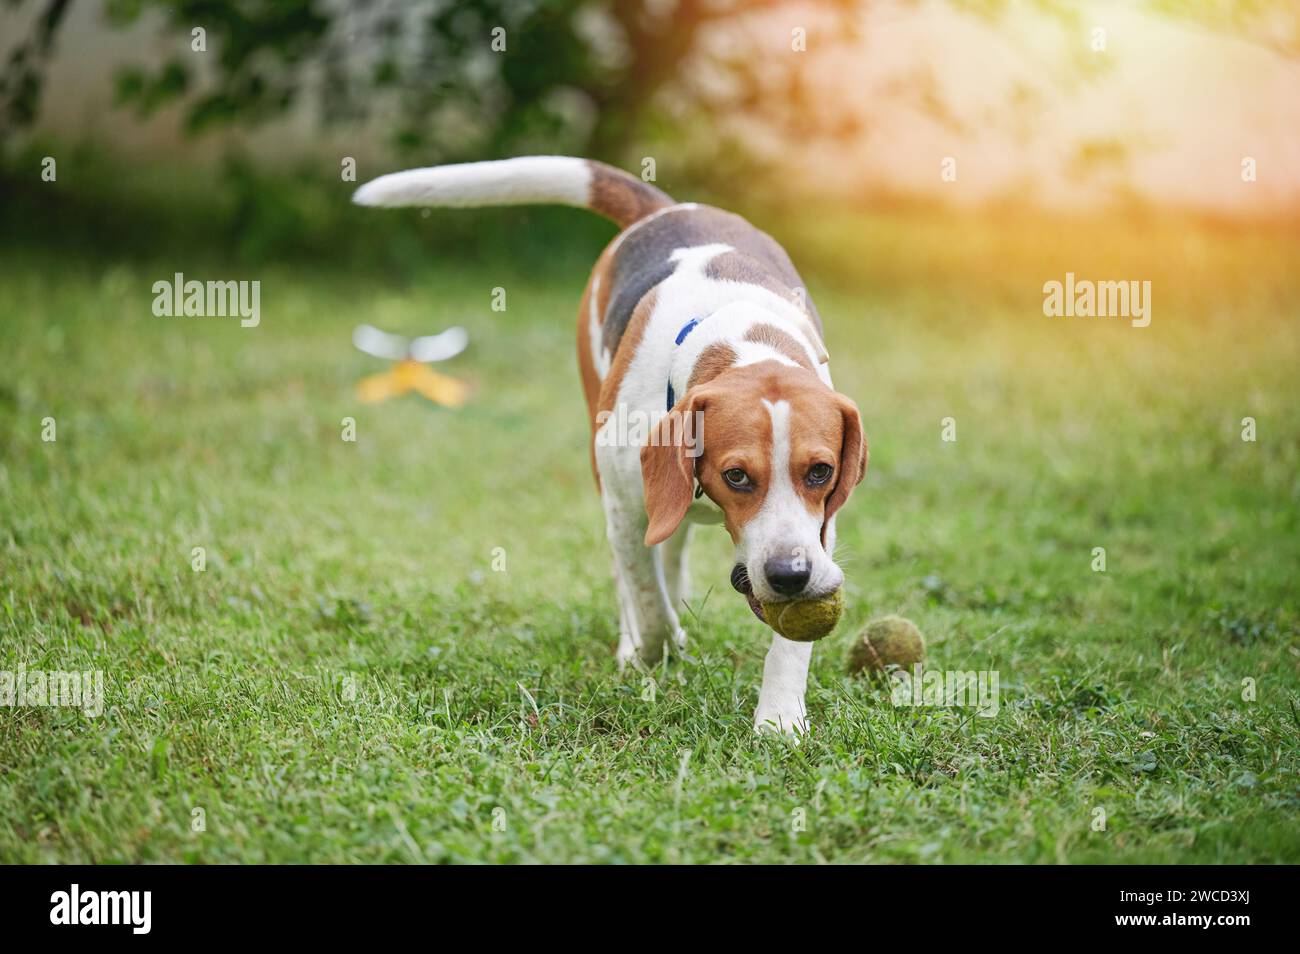 Beagle dog running with ball in mouth in green blurred background Stock Photo